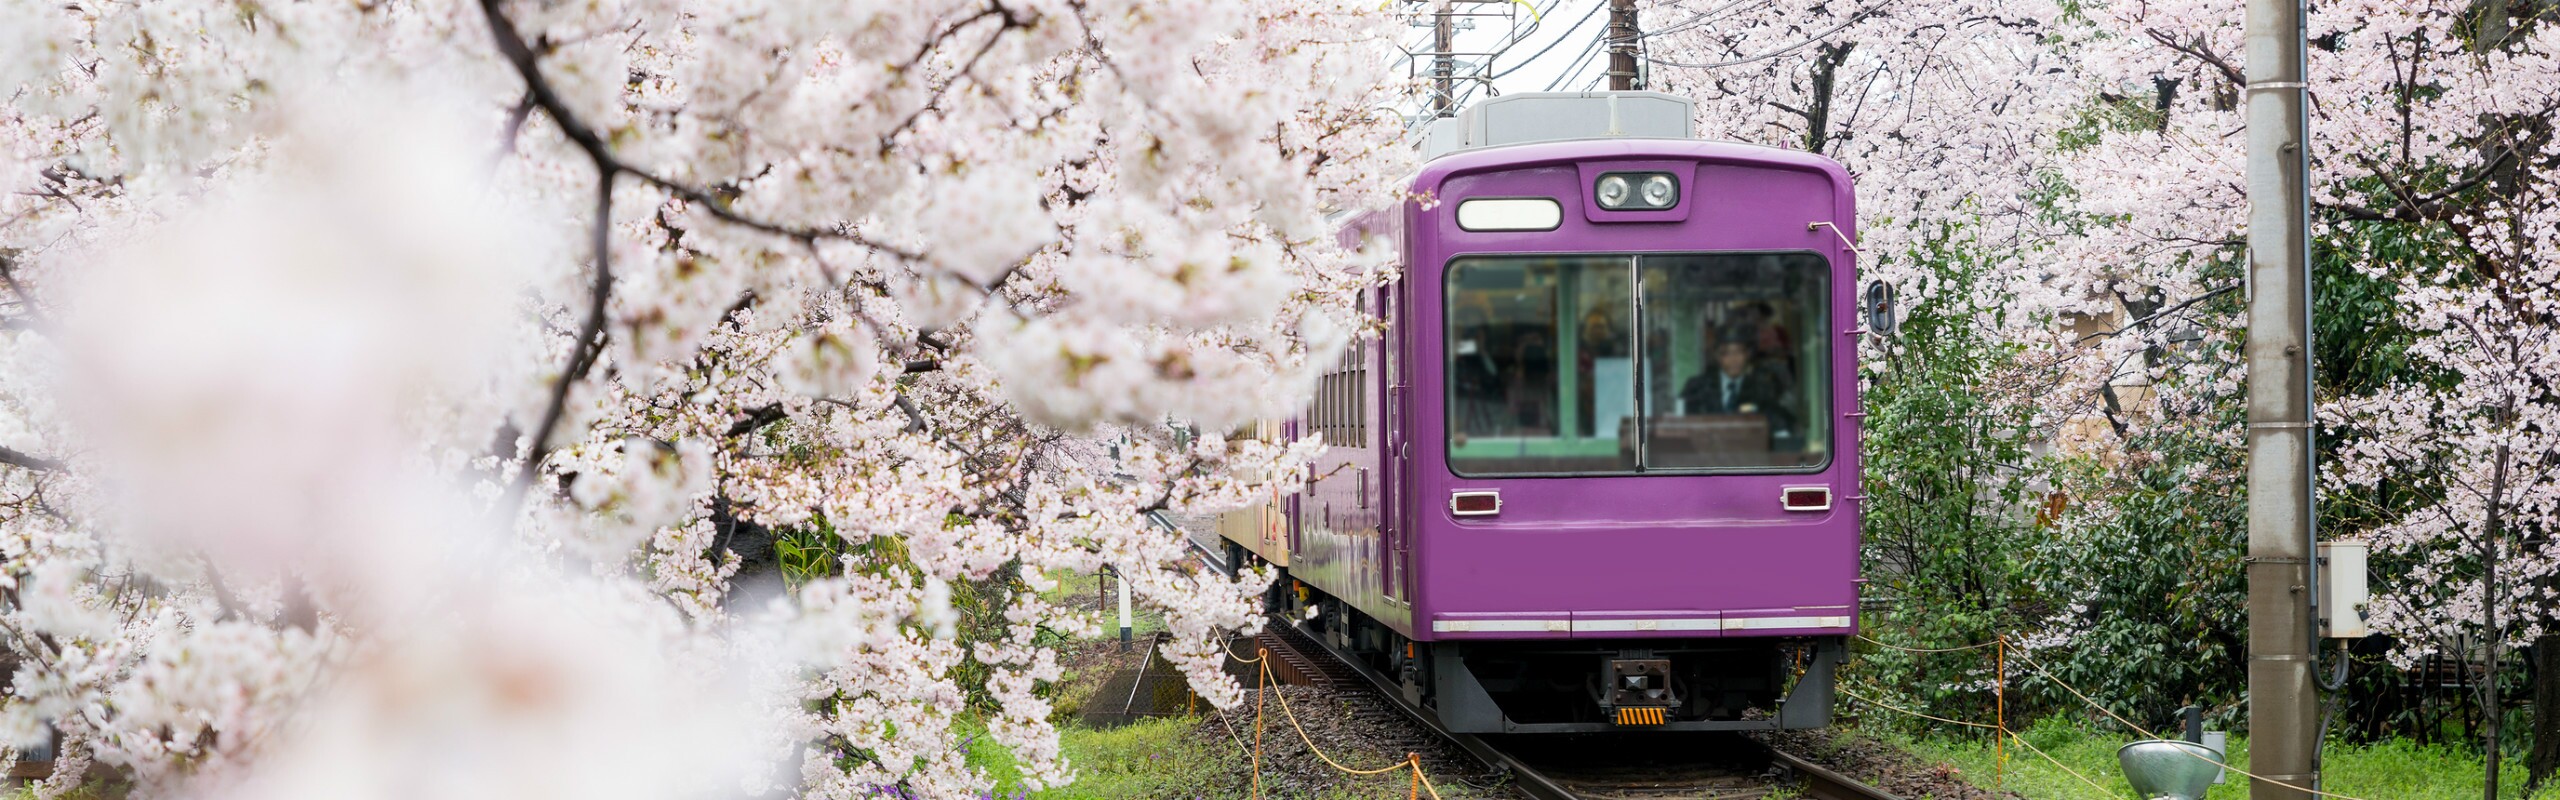 Traveling in Japan During the Cherry Blossom Season